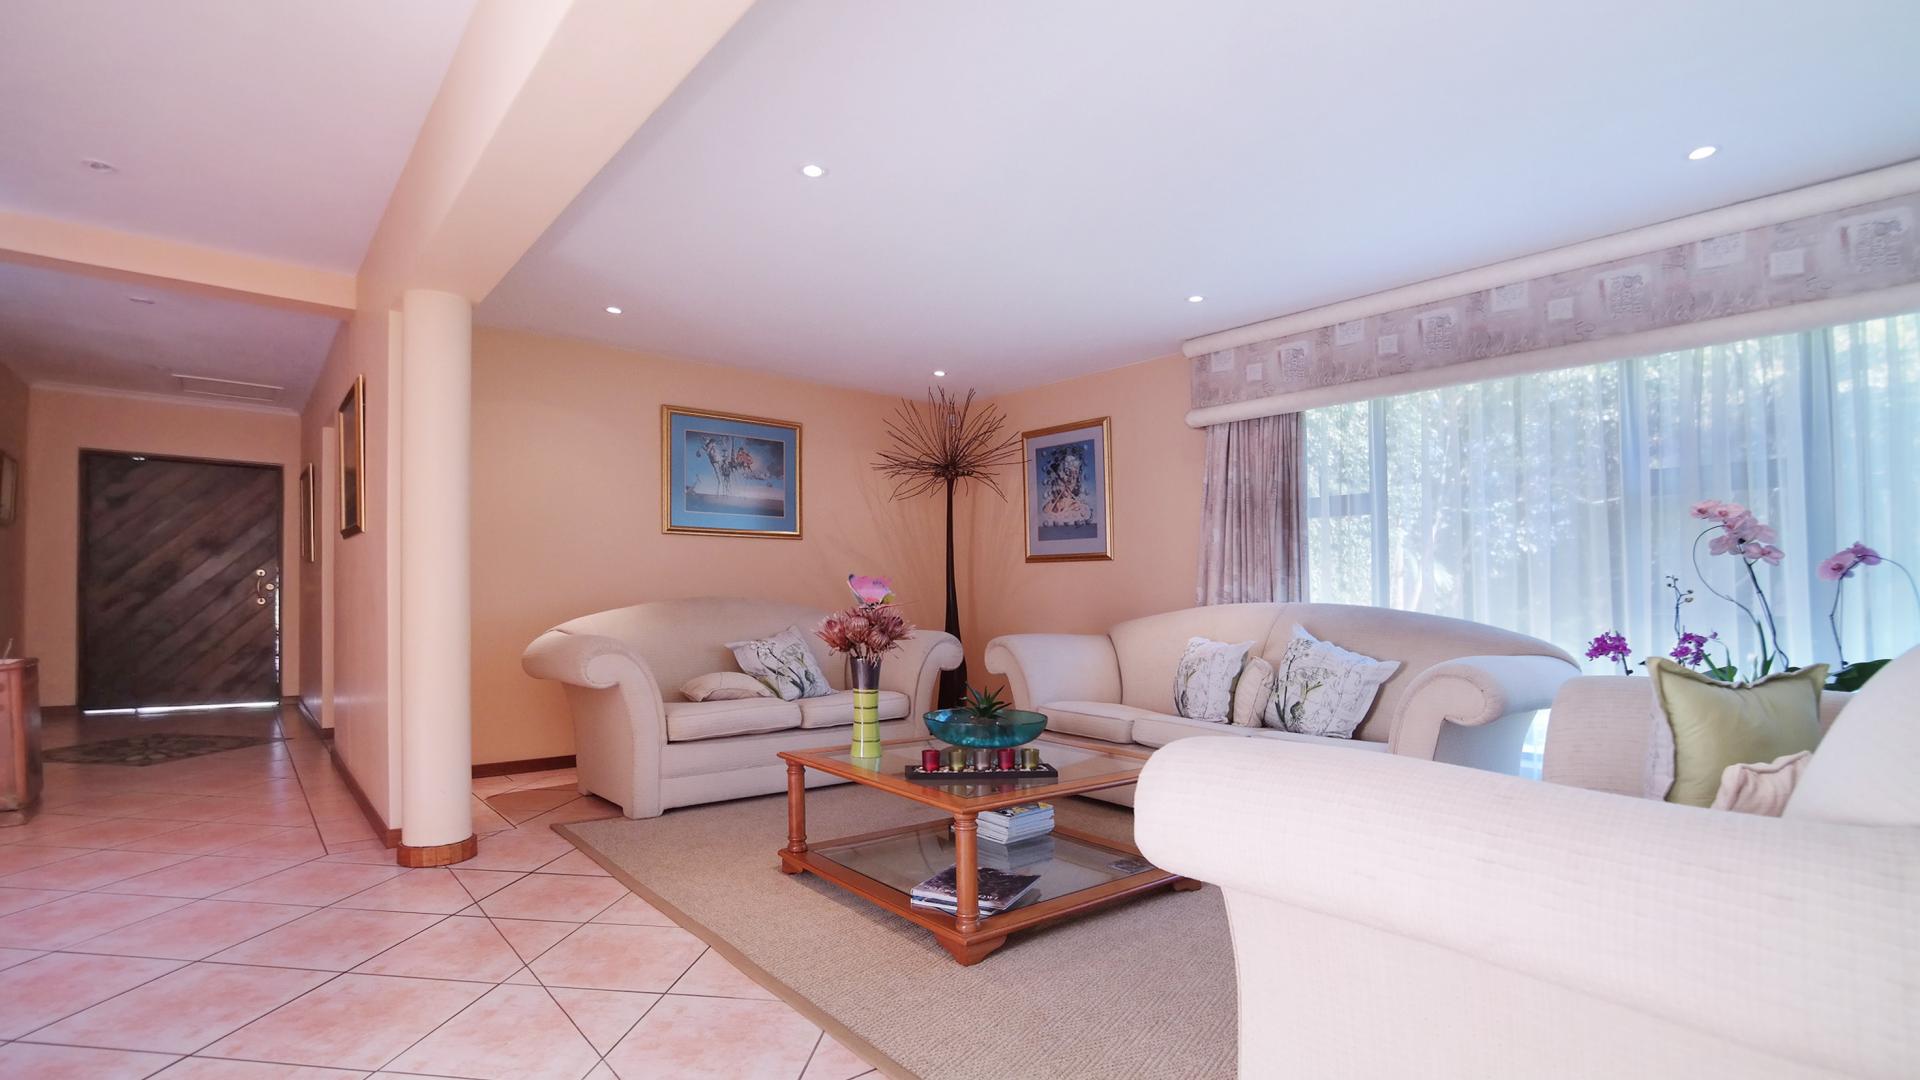 Lounges - 41 square meters of property in Woodhill Golf Estate